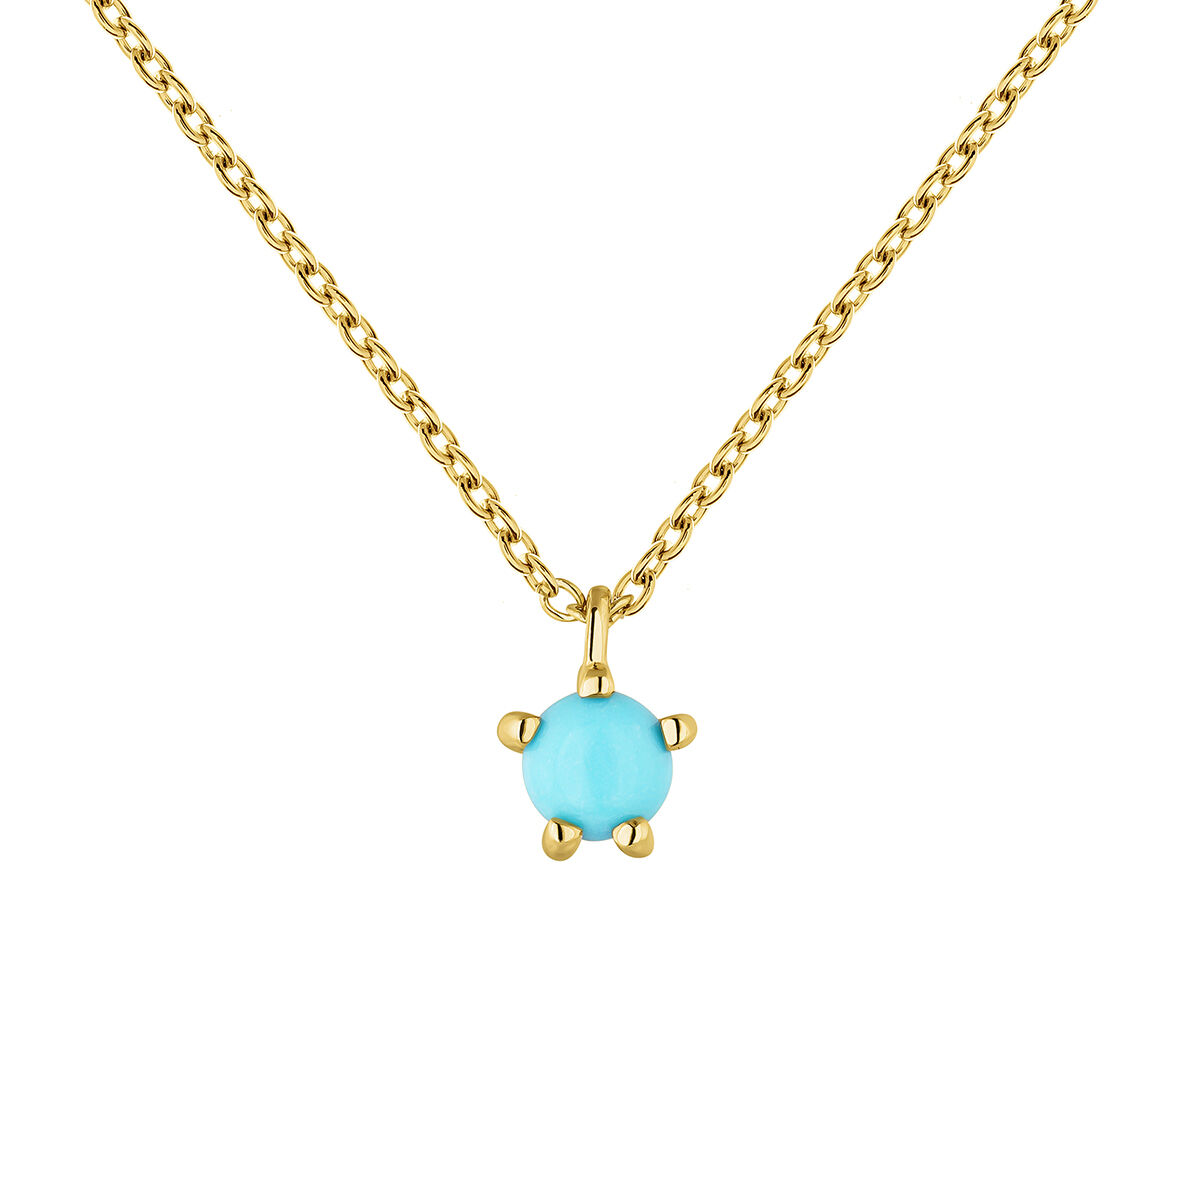 Collier turquoise or 9 ct , J04708-02-TQ, mainproduct